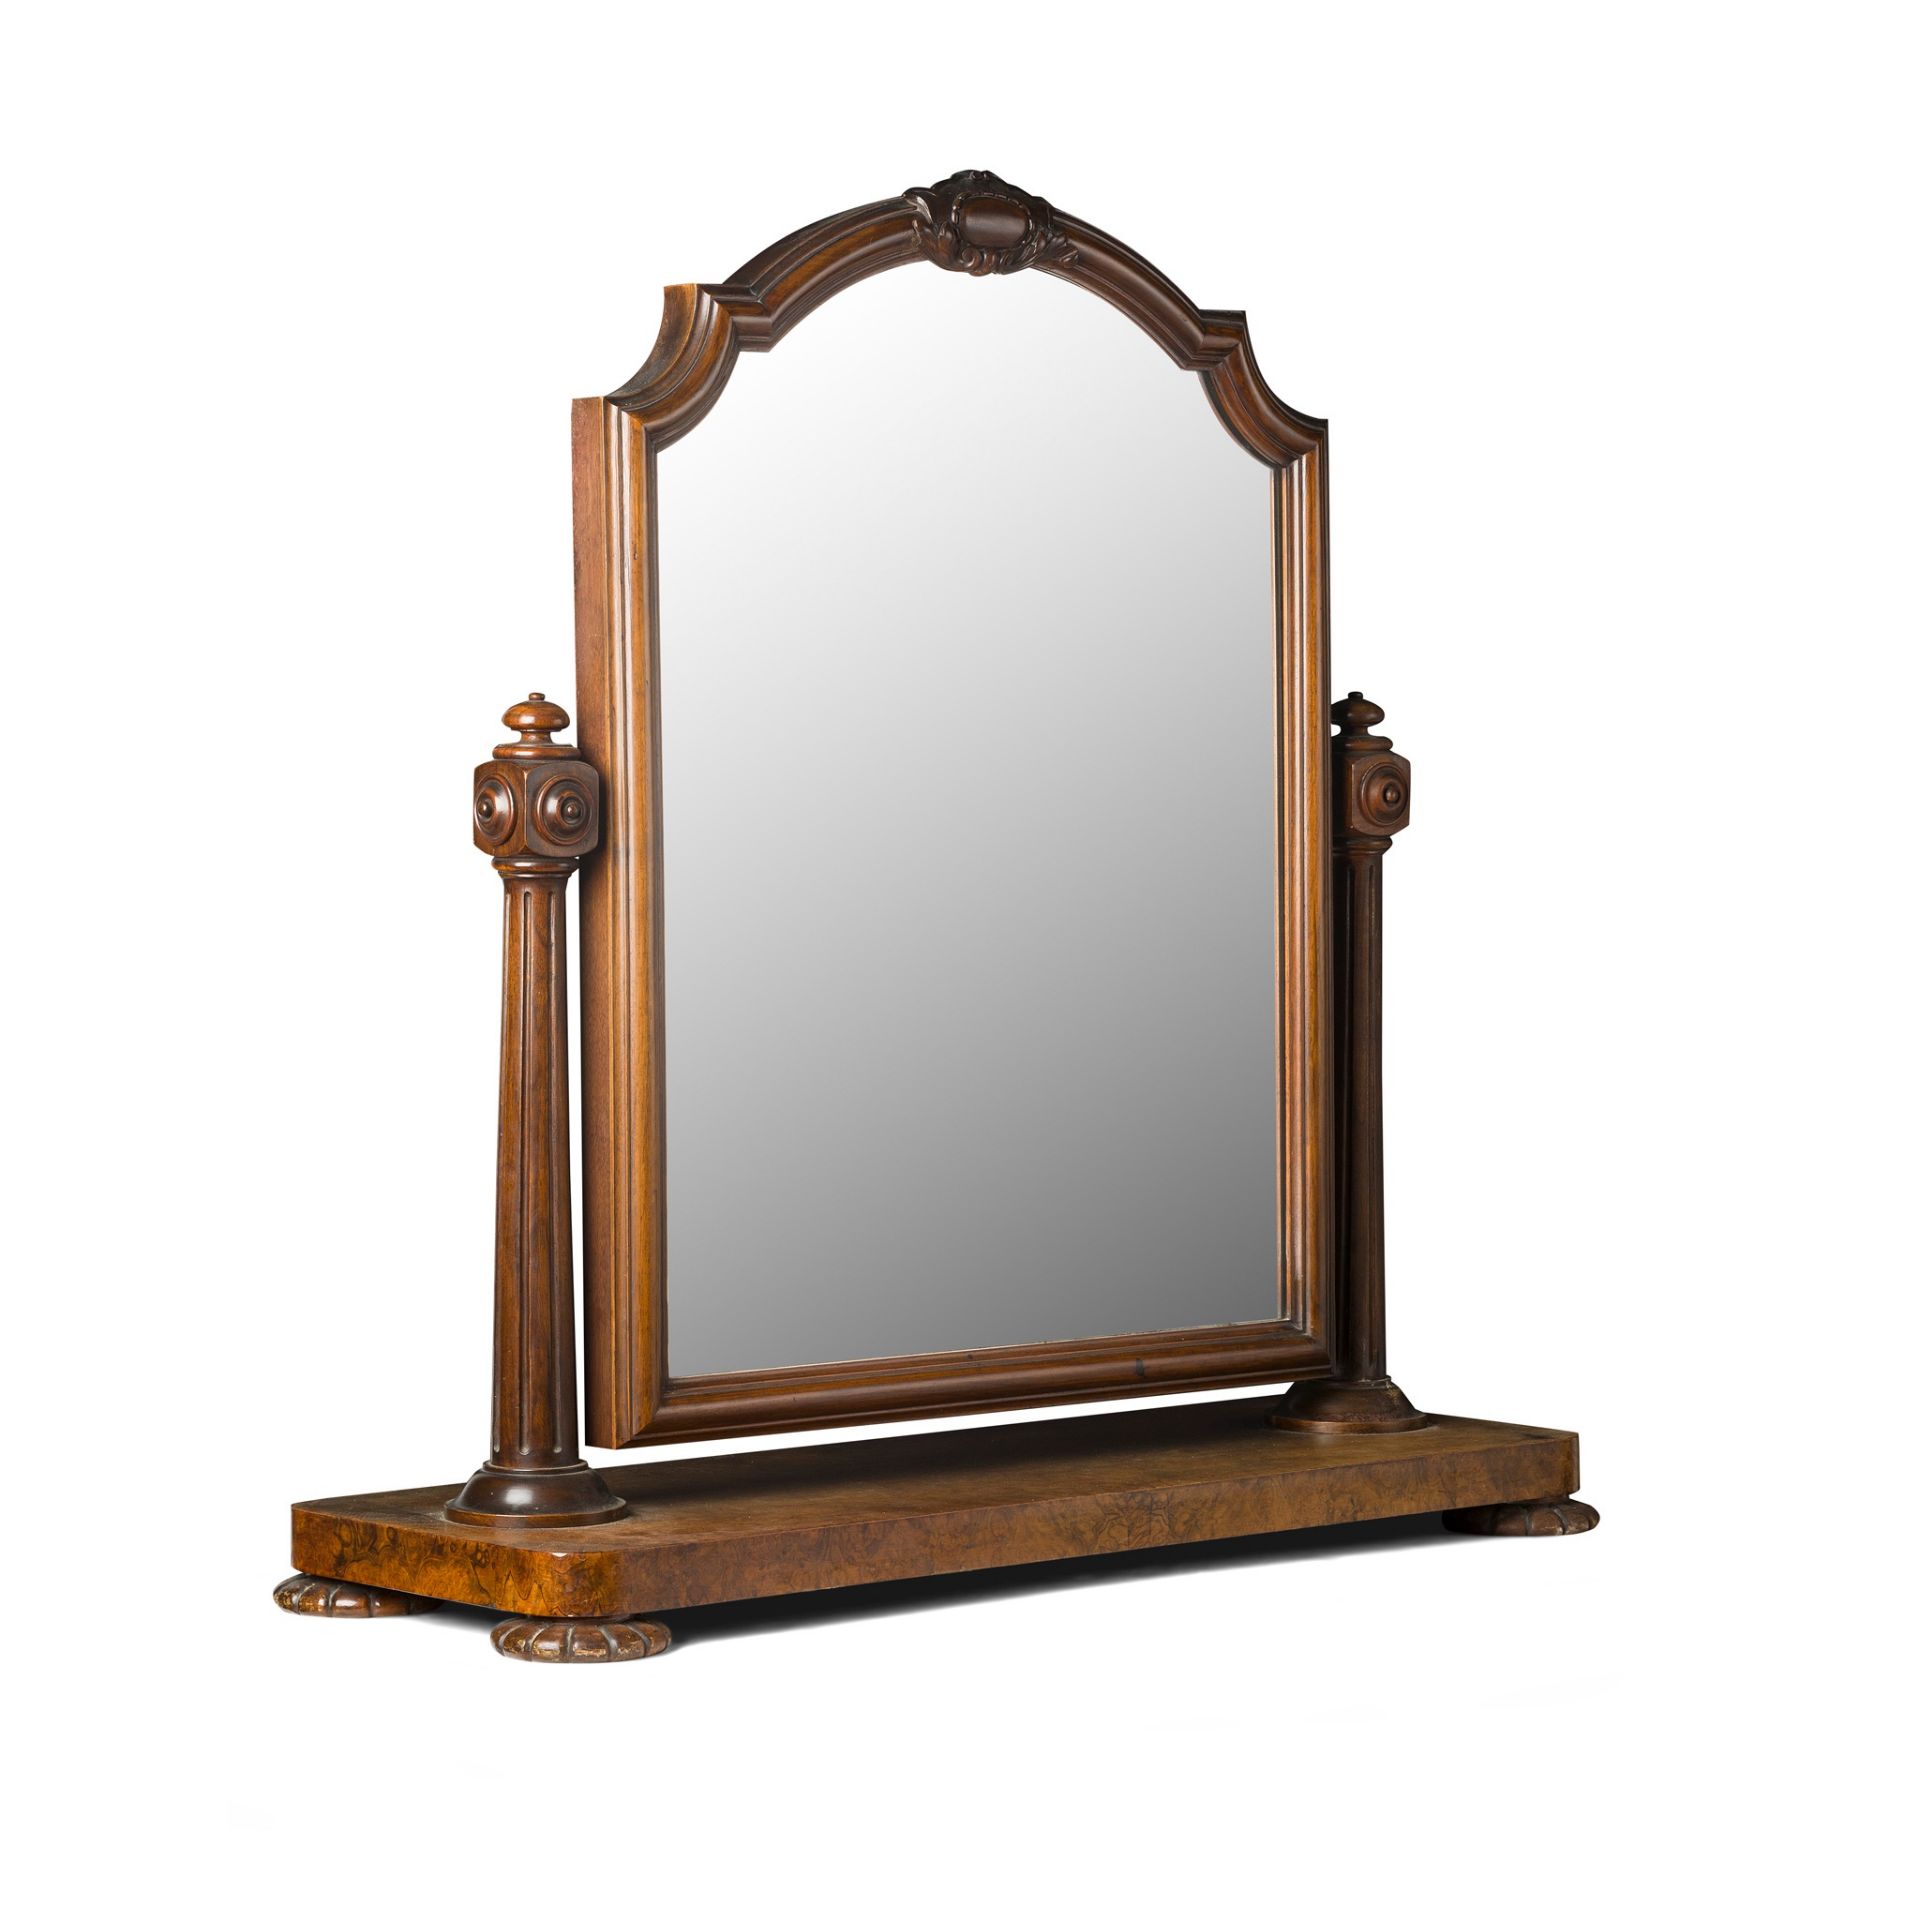 PAIR OF EARLY VICTORIAN BURR WALNUT TOILET MIRRORS MID-19TH CENTURY - Image 3 of 3